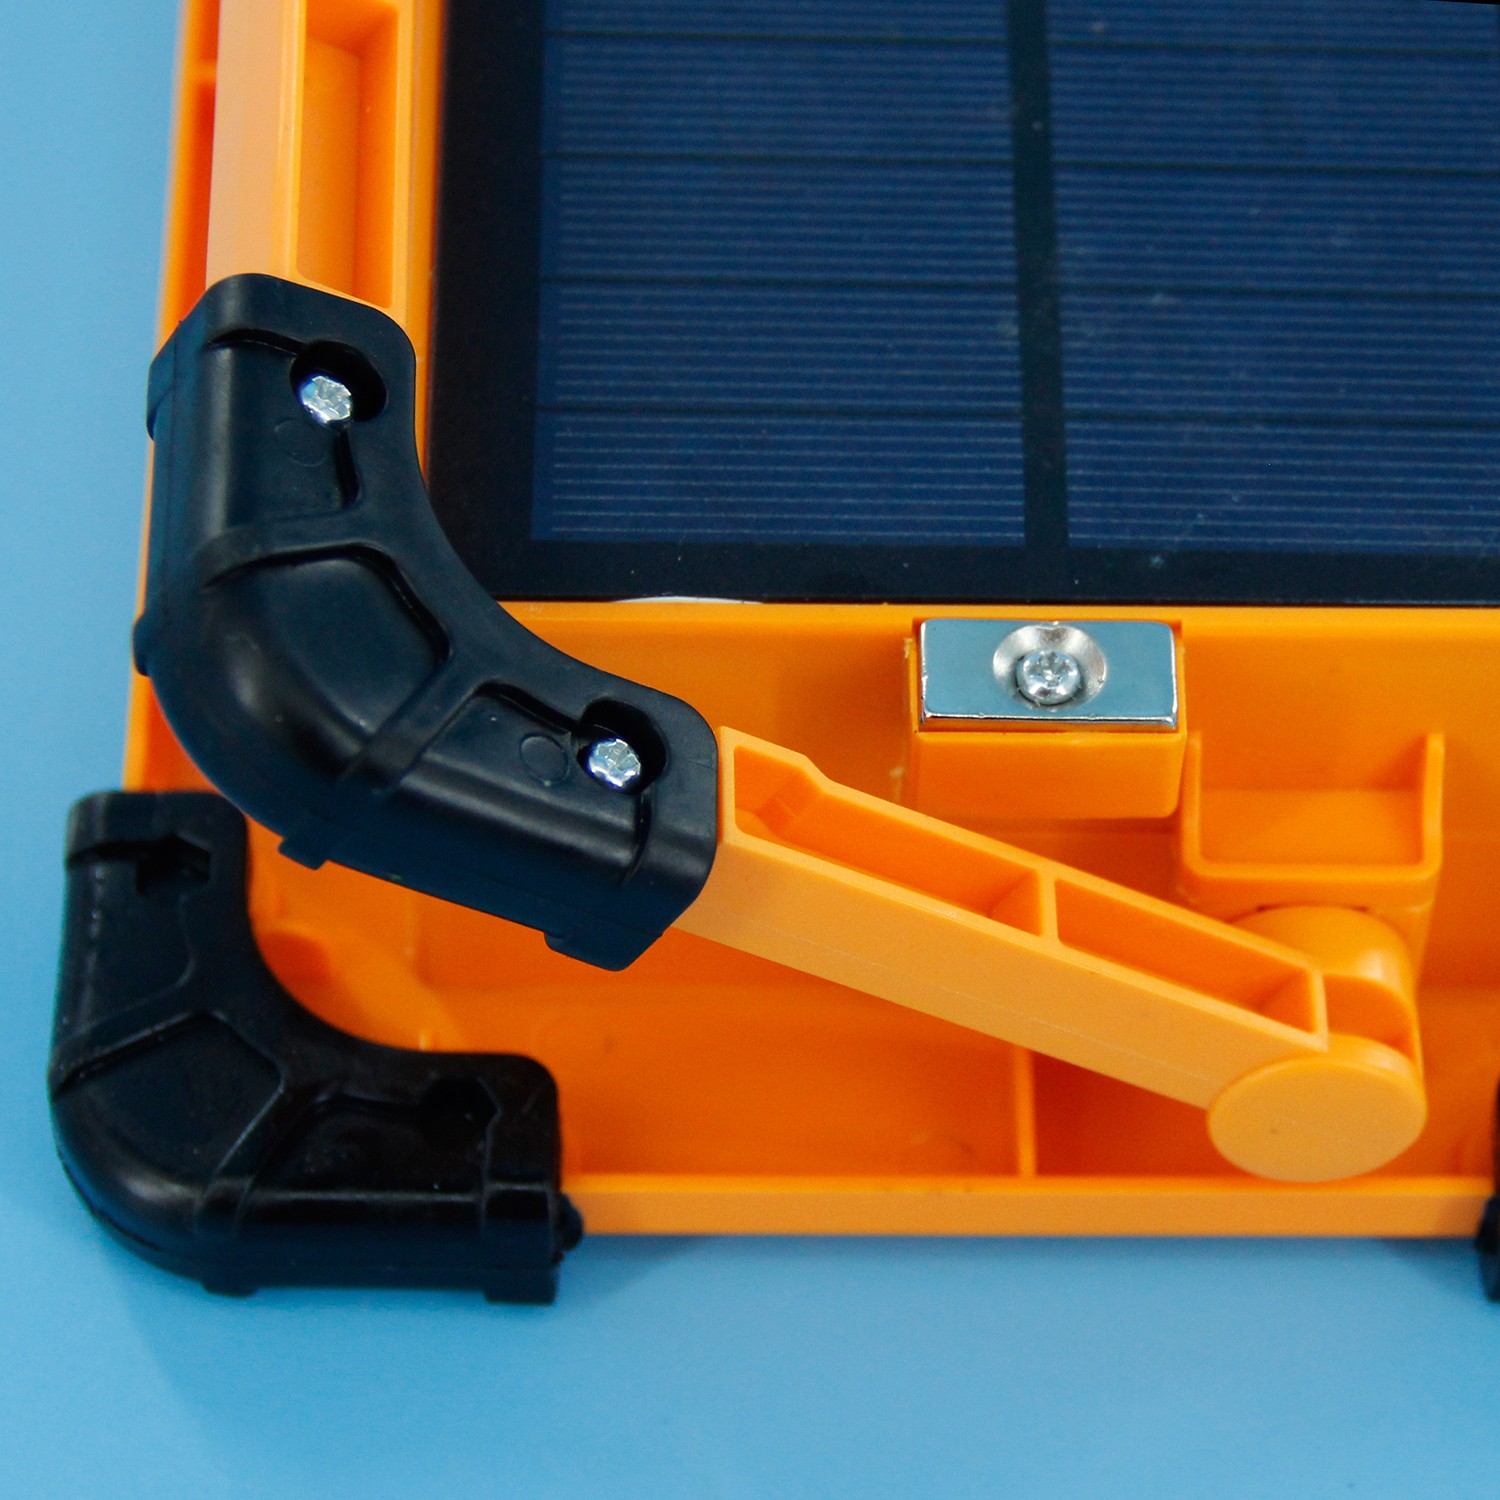 Newly launched solar emergency portable LED light